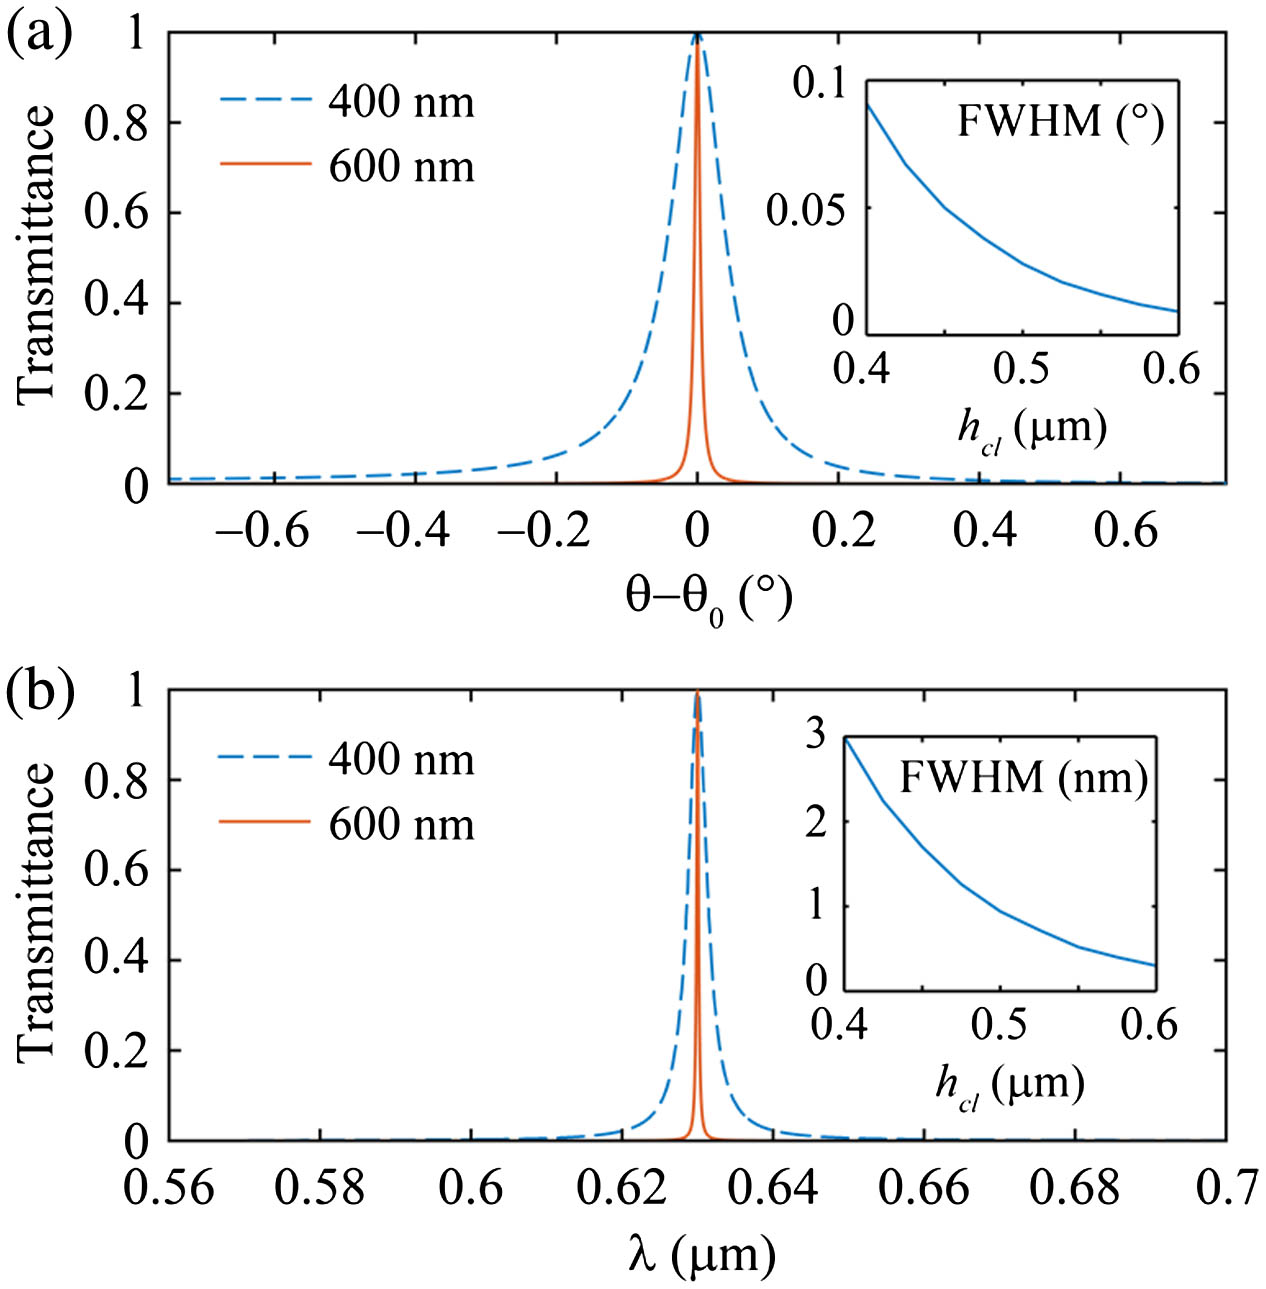 (a) Angular and (b) wavelength TGPF transmission spectra at hcl=400 nm (dashed blue curves) and hcl=600 nm (solid red curves). The insets show the FWHM of the resonant peaks versus hcl.